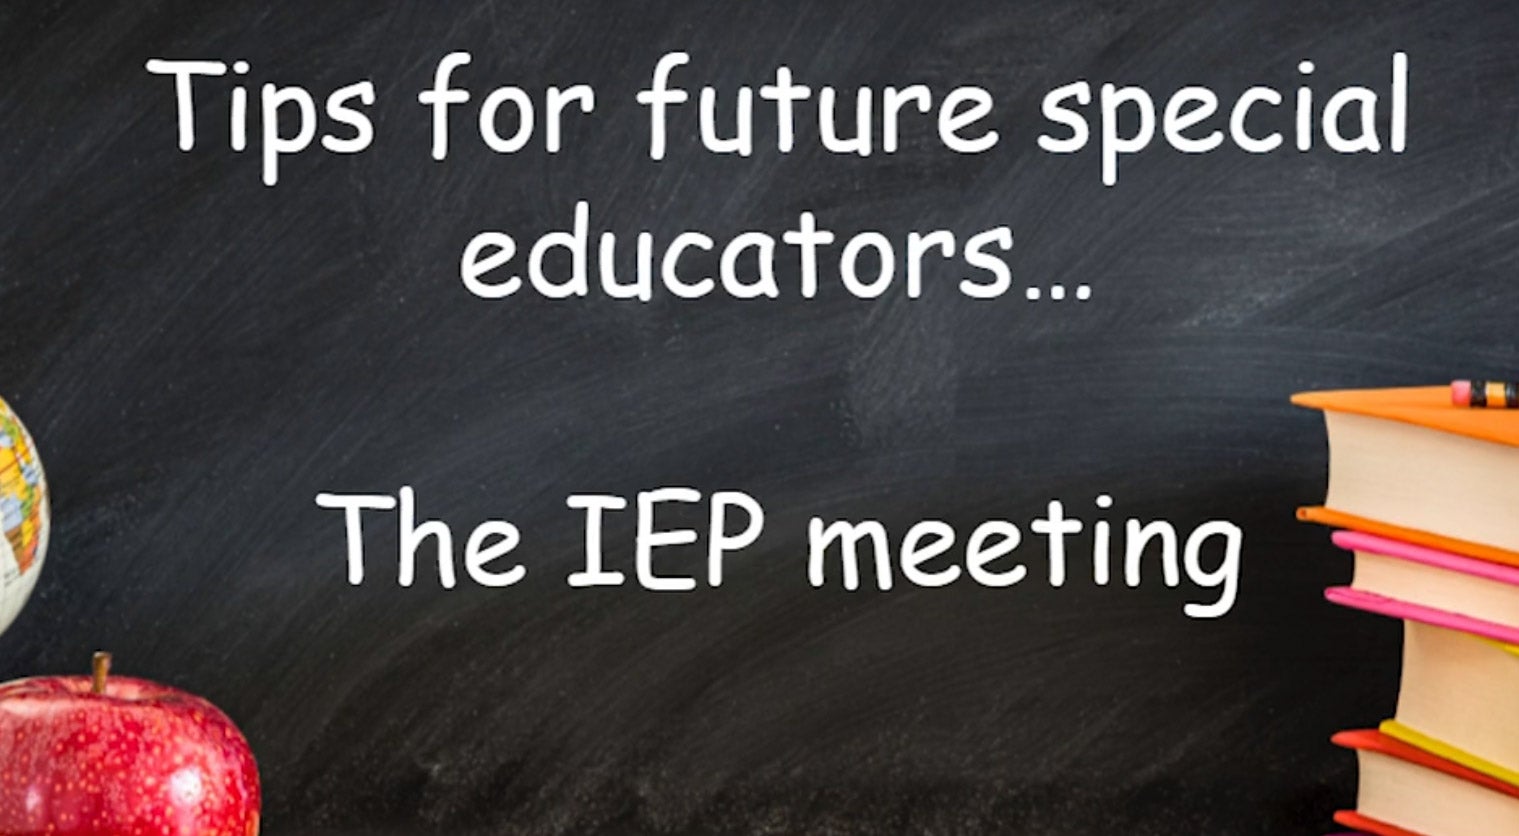 Tips for future special educators... The IEP Meeting